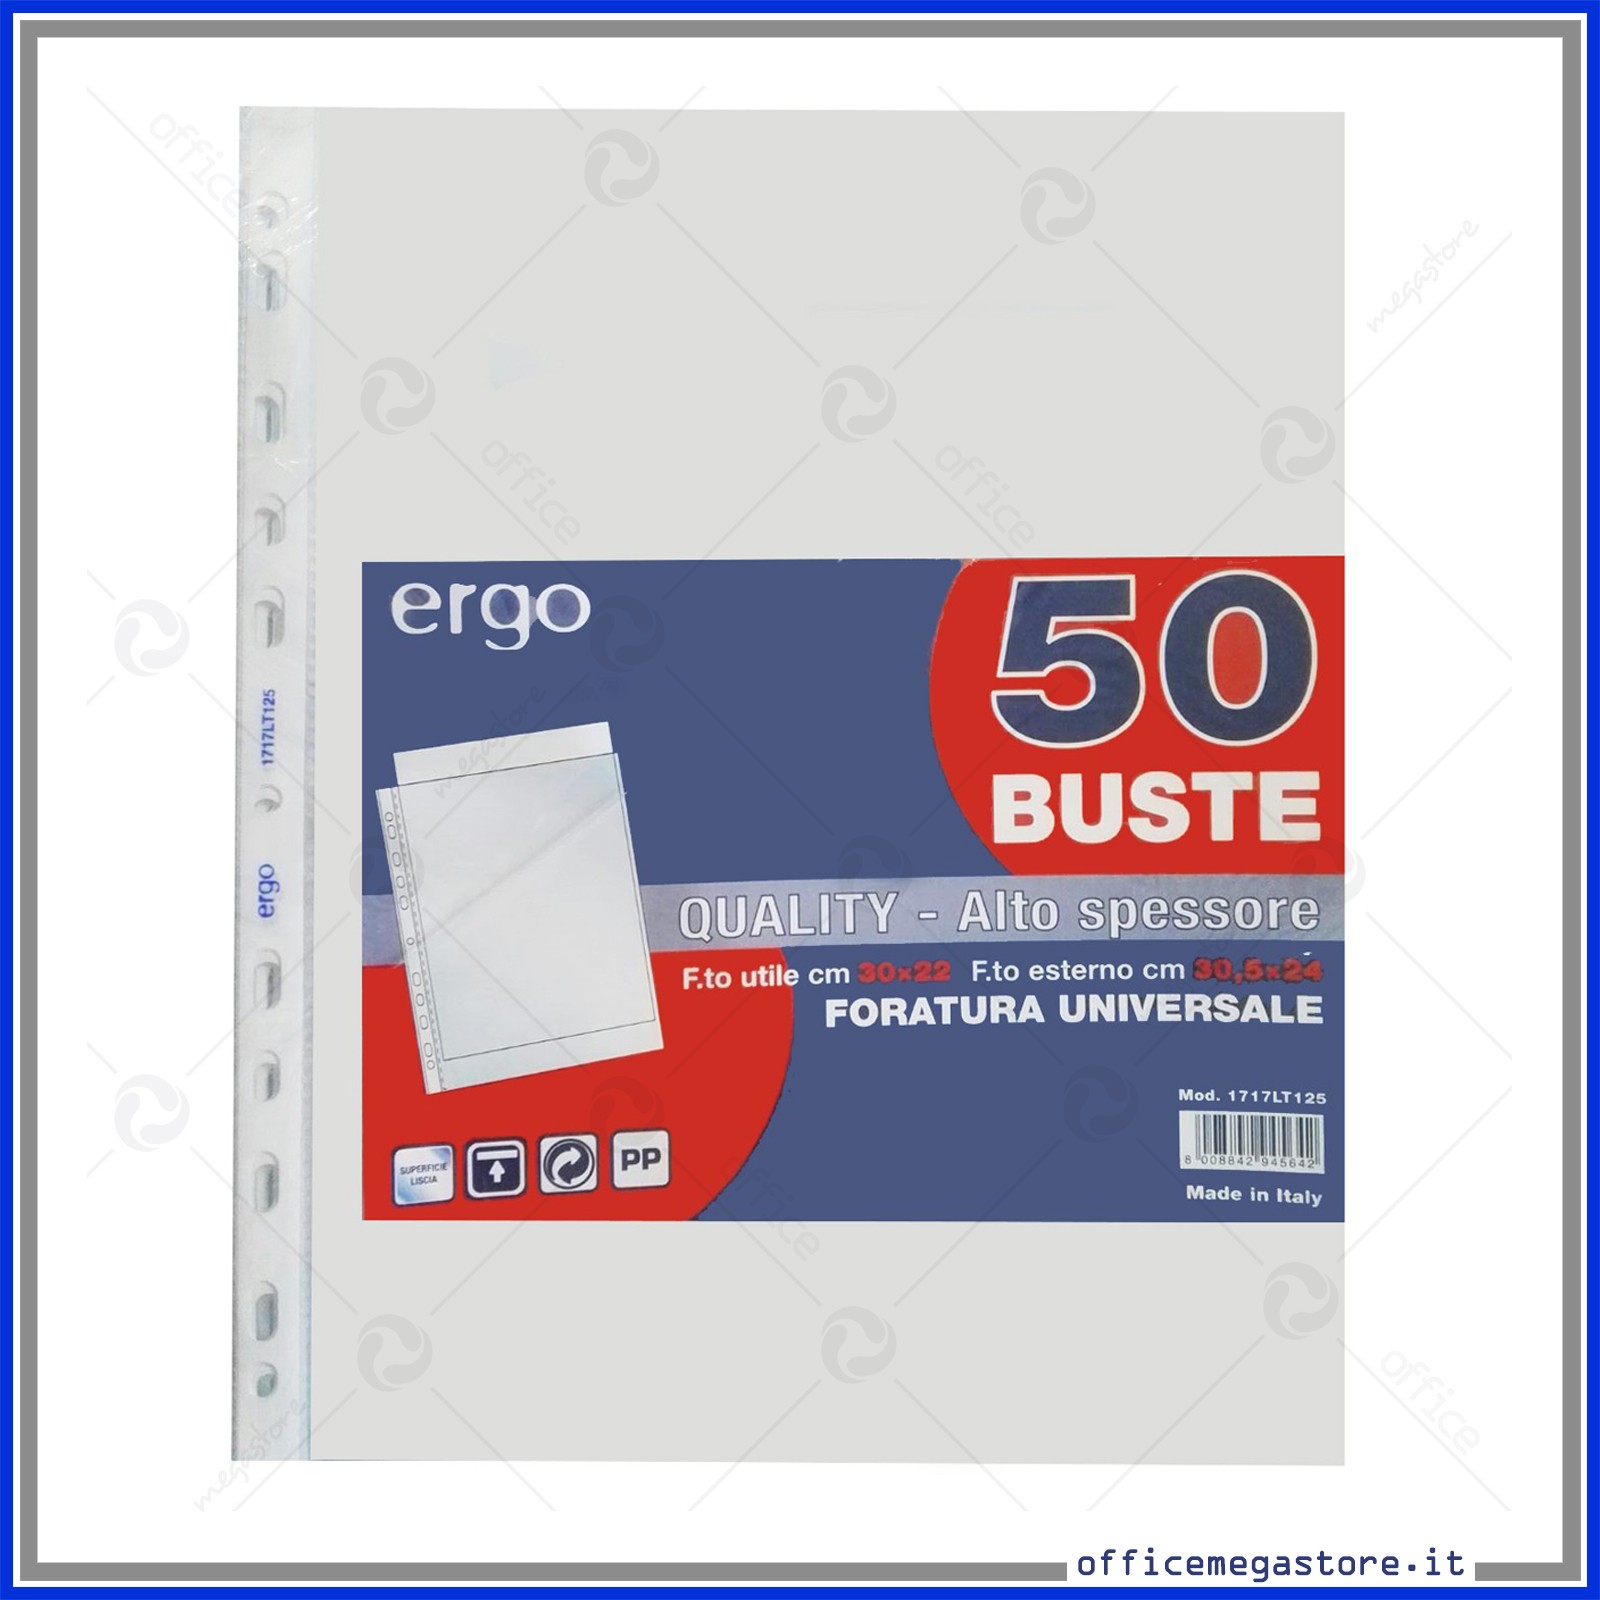 700 buste per MANGAS 130x180 mm – My-smartup